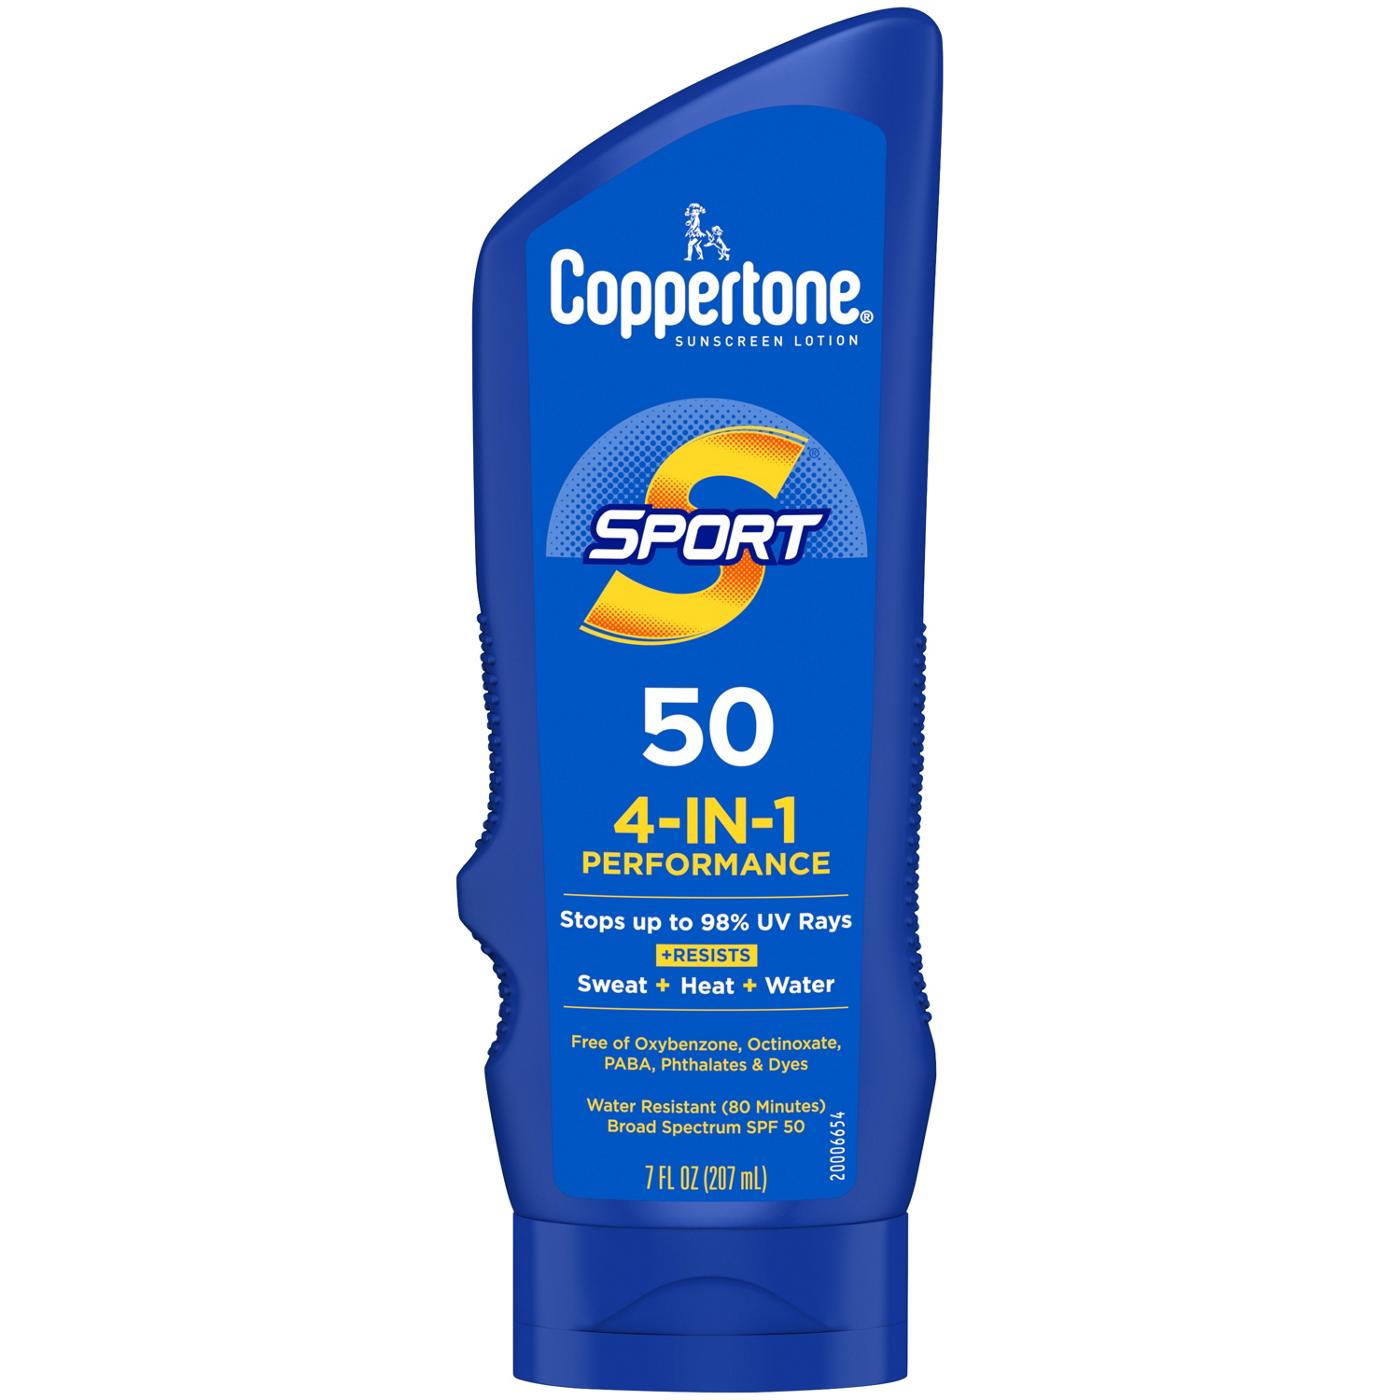 Coppertone Sport Sunscreen Lotion SPF 50; image 1 of 2